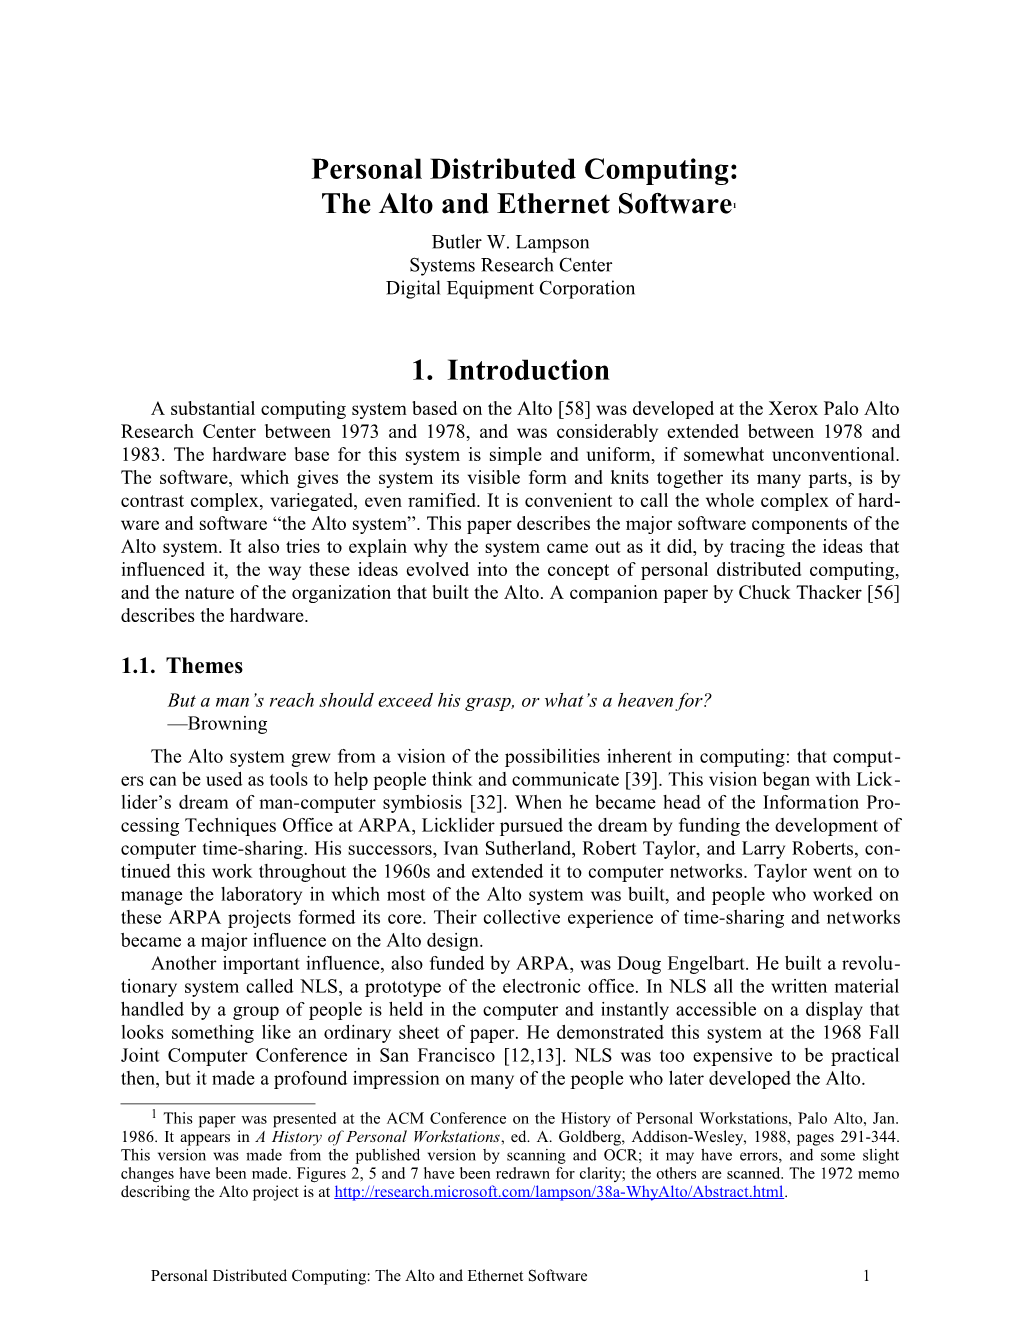 Personal Distributed Computing: the Alto and Ethernet Software